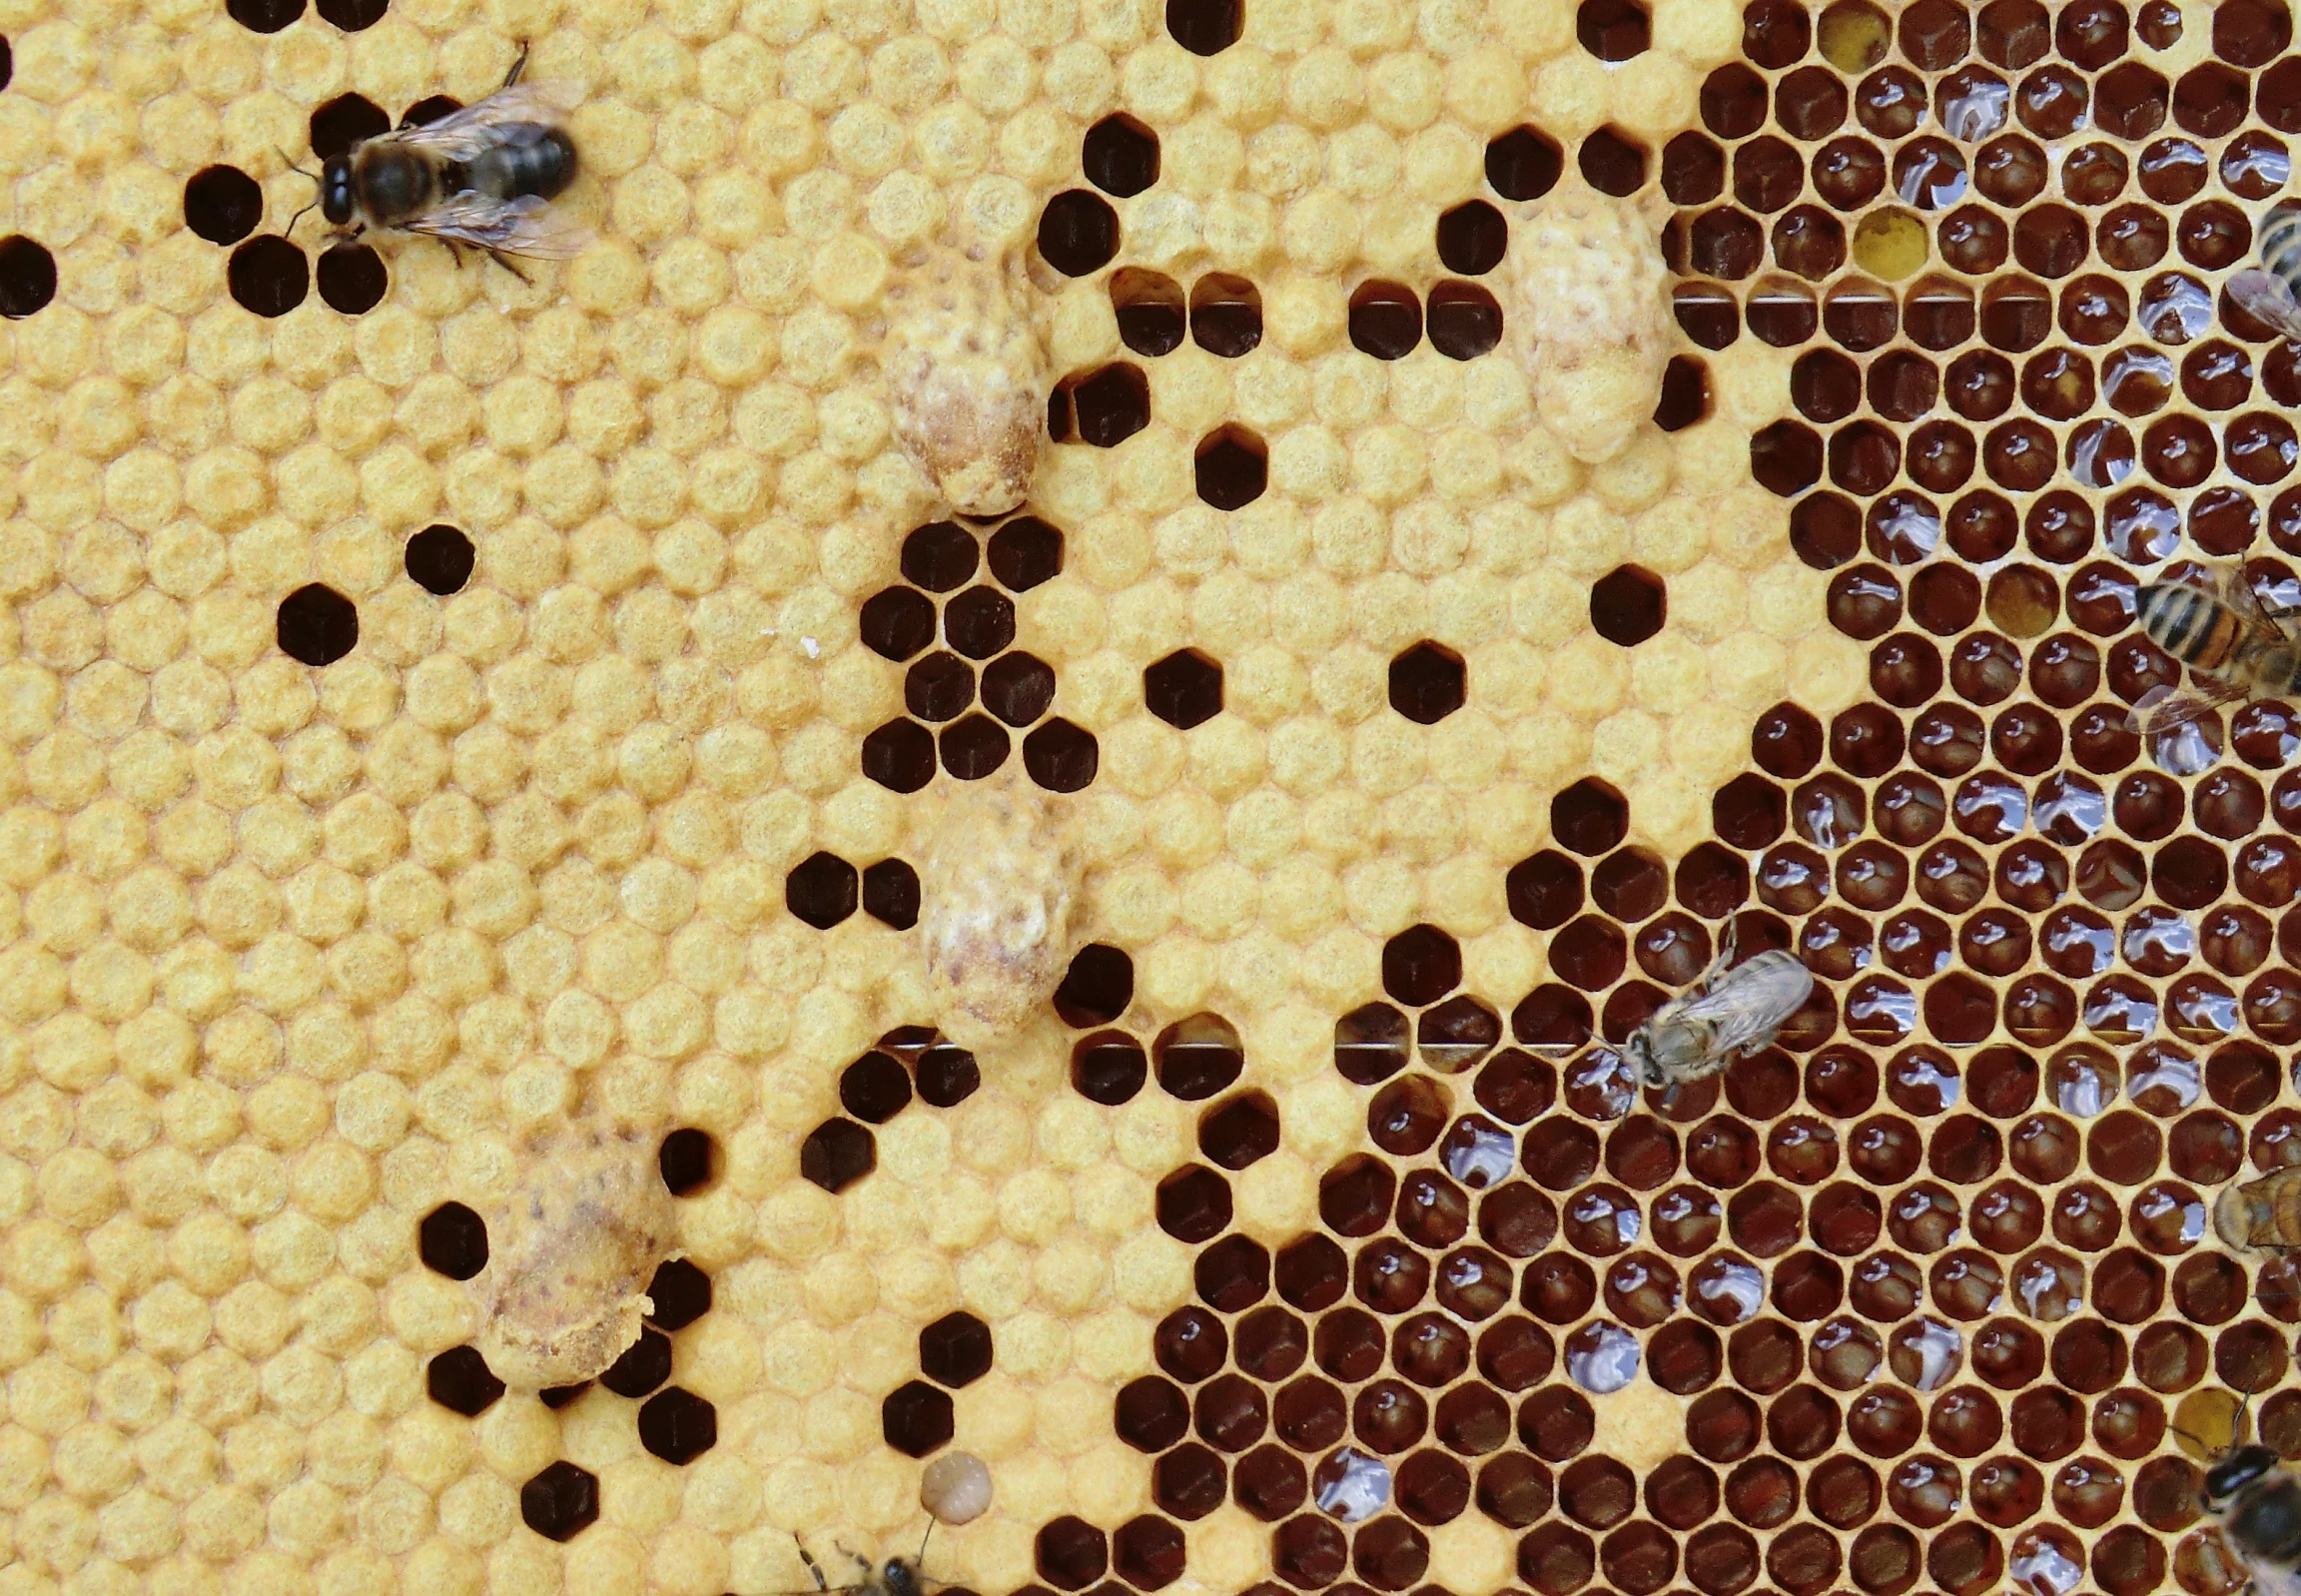 several honeybees on honeycombs and some water